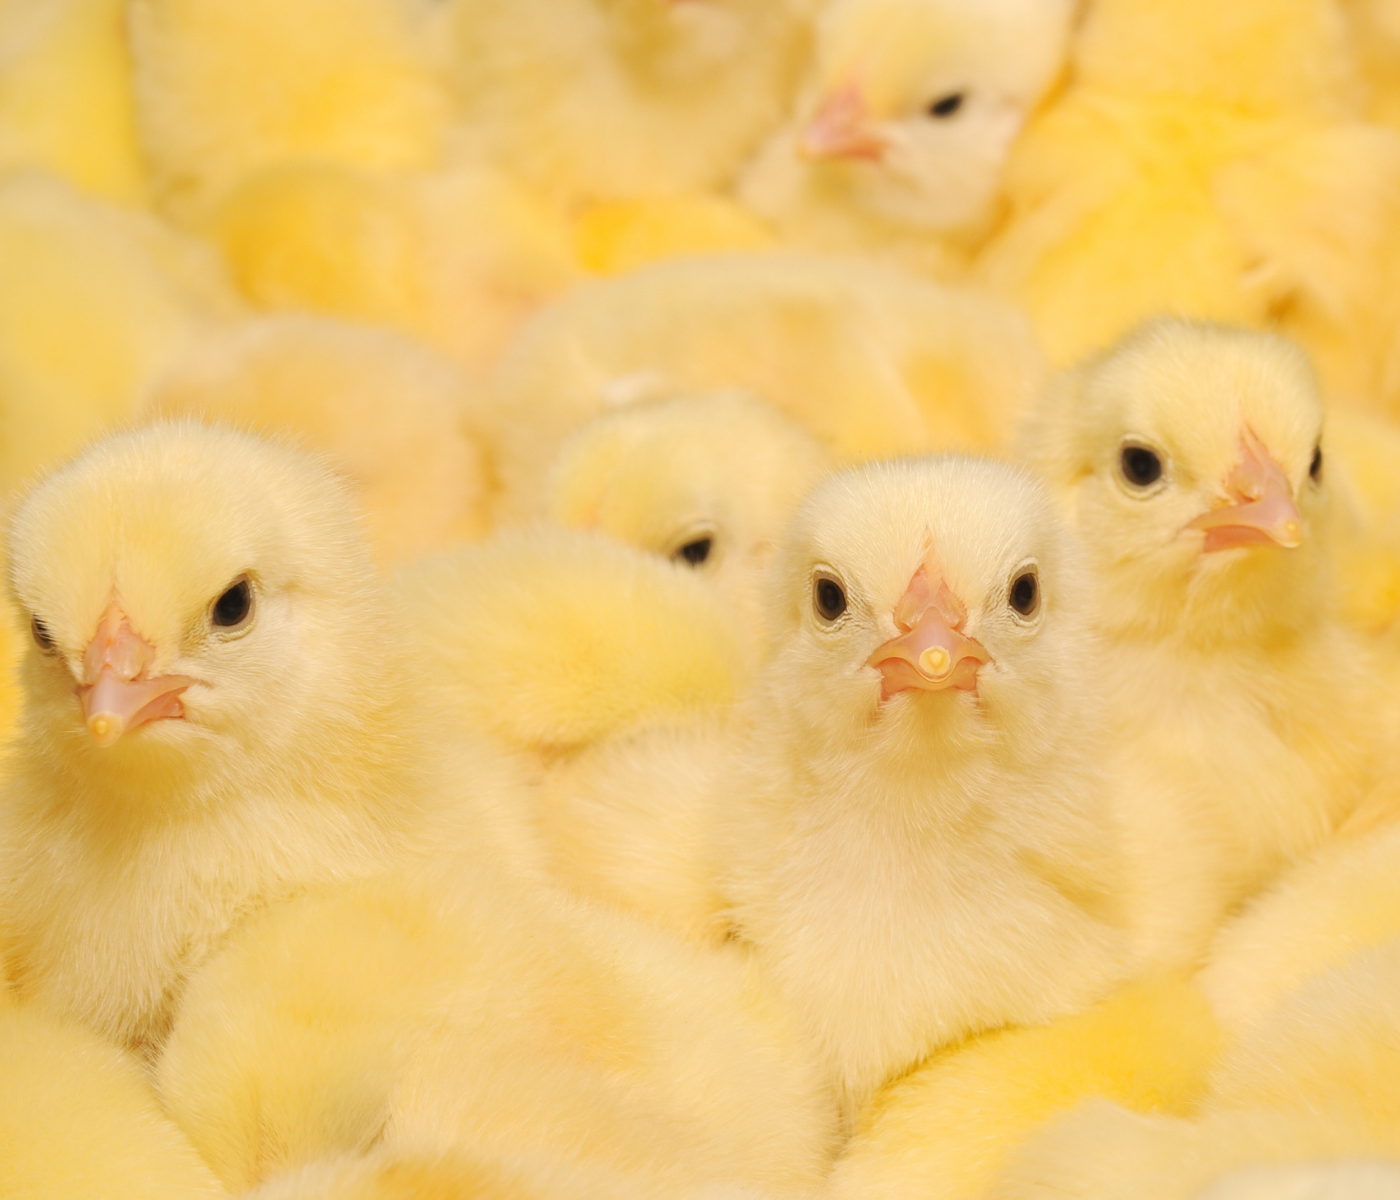 Quality chicks born in the hatchery: care and monitoring that...